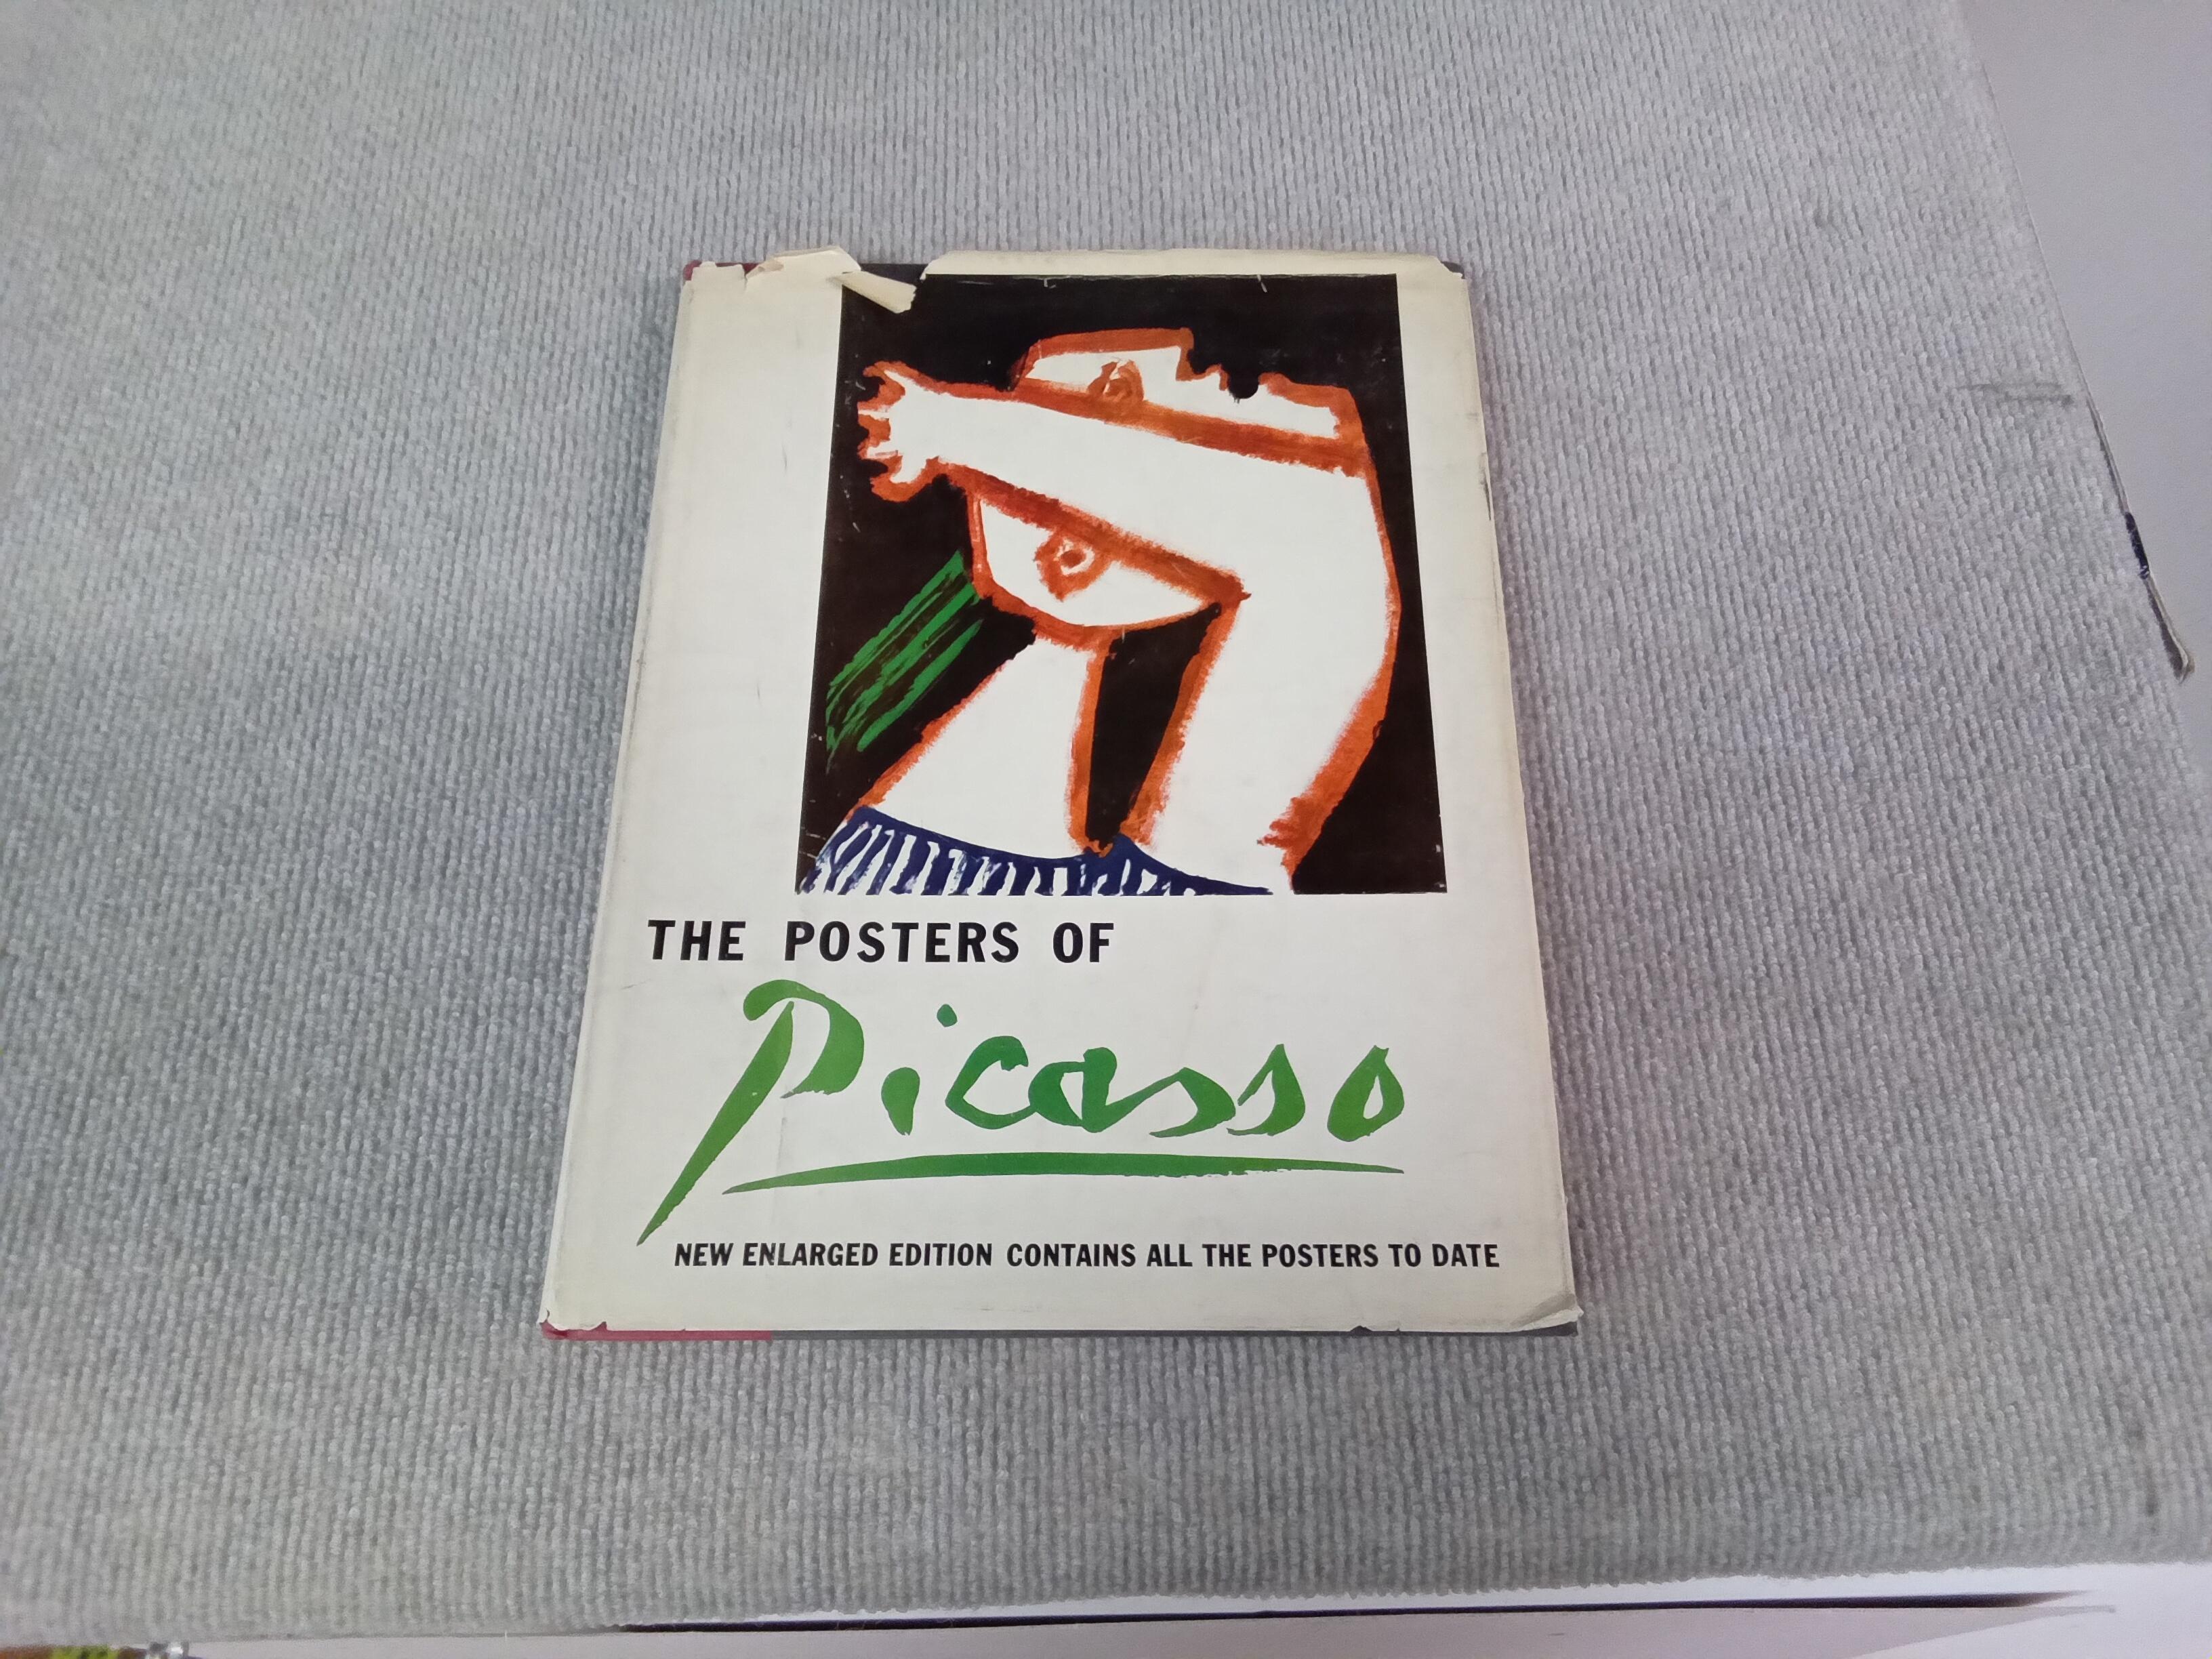 1964 Nach Pablo Picasso 'The Posters of Picasso' Kubismus Buch im Angebot 1